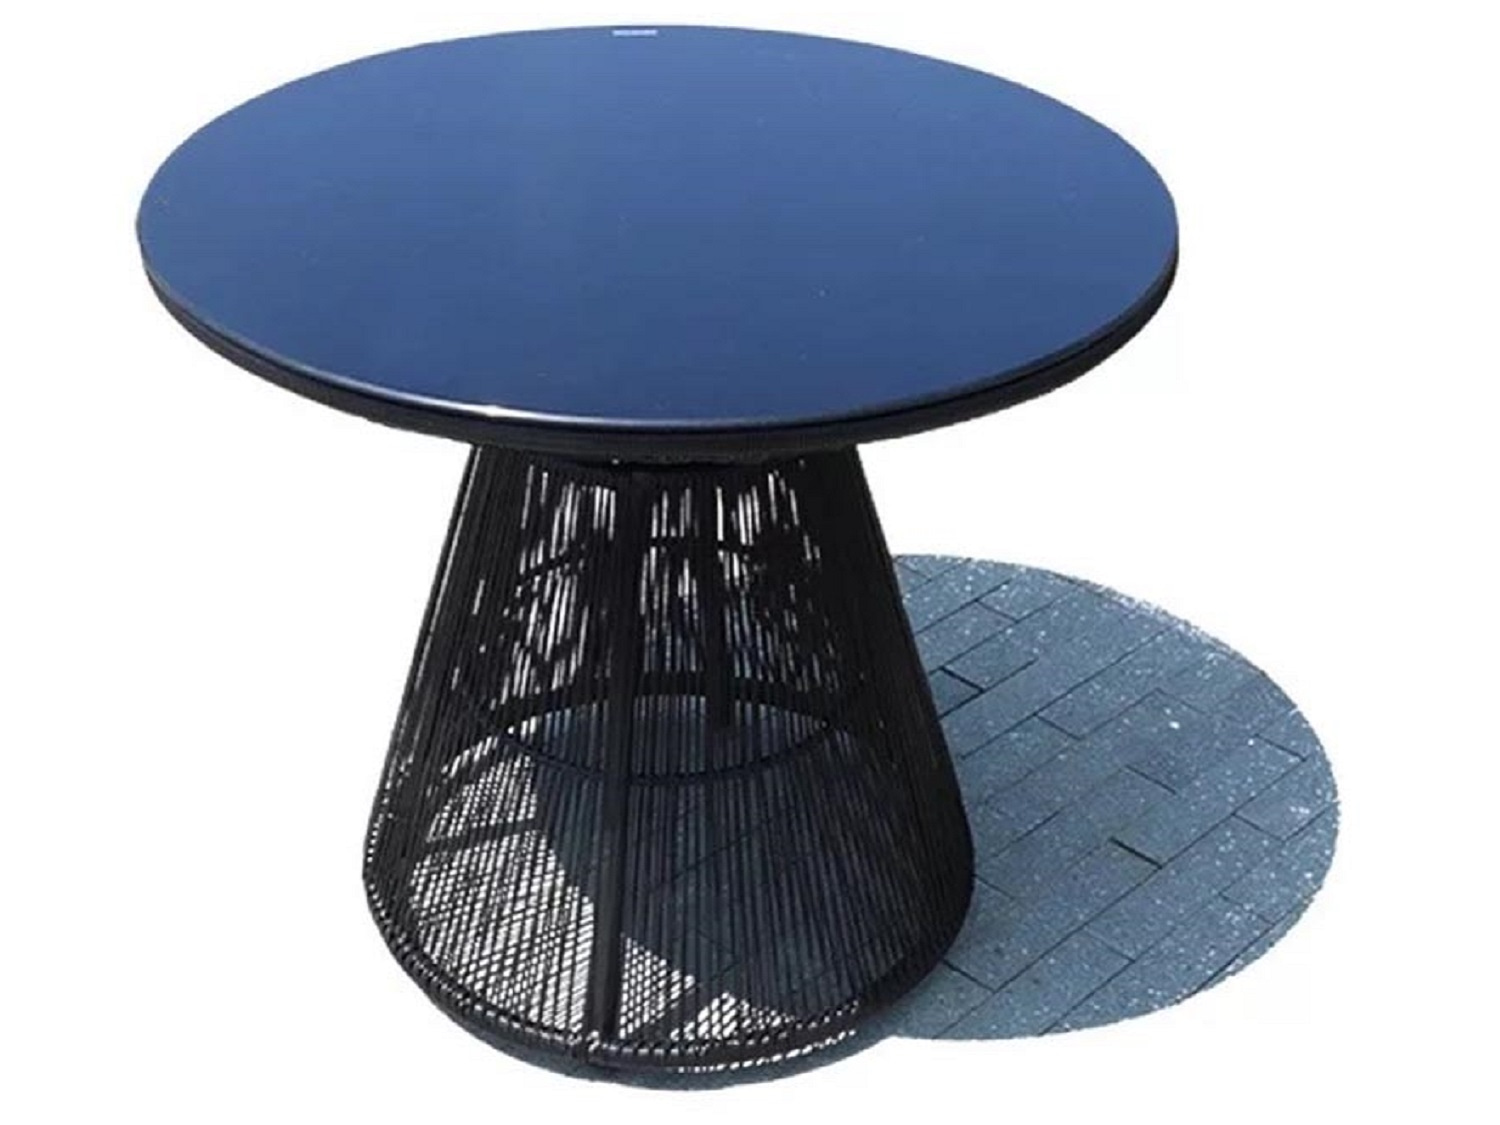 WESLEY Outdoor Table